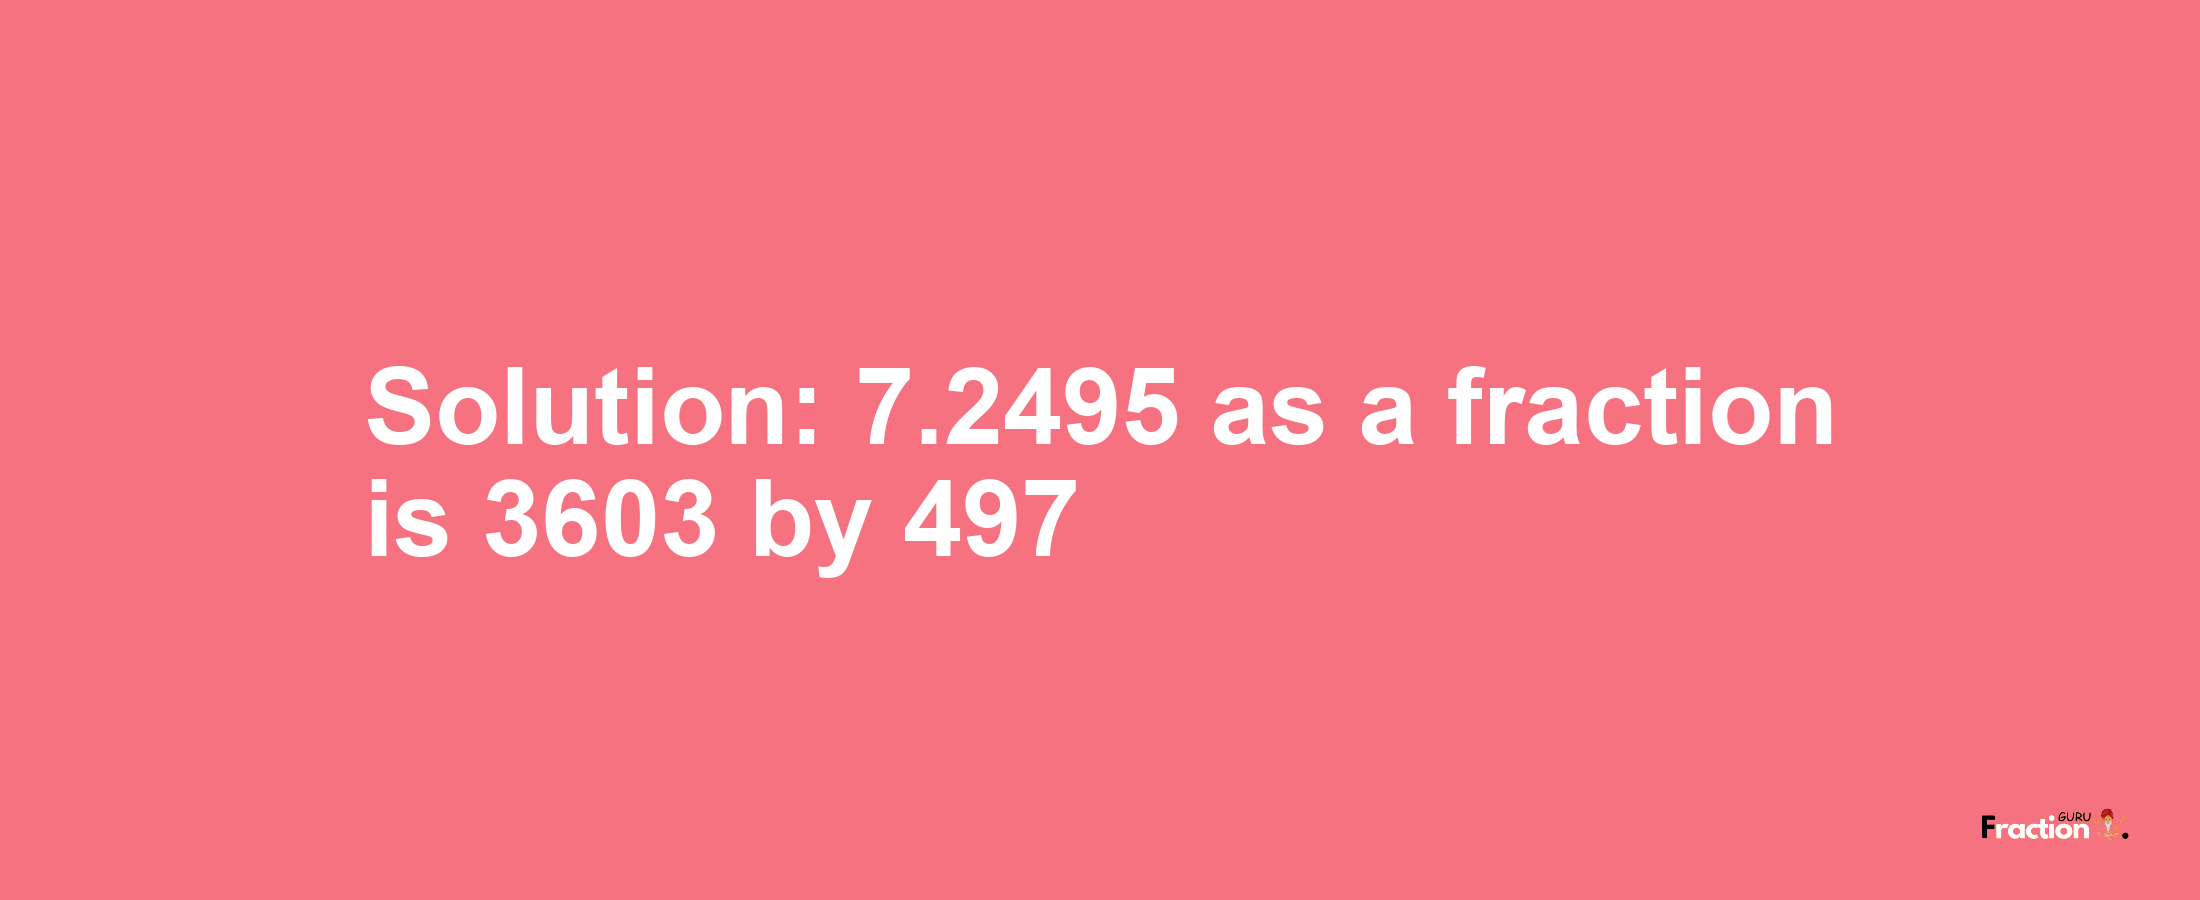 Solution:7.2495 as a fraction is 3603/497